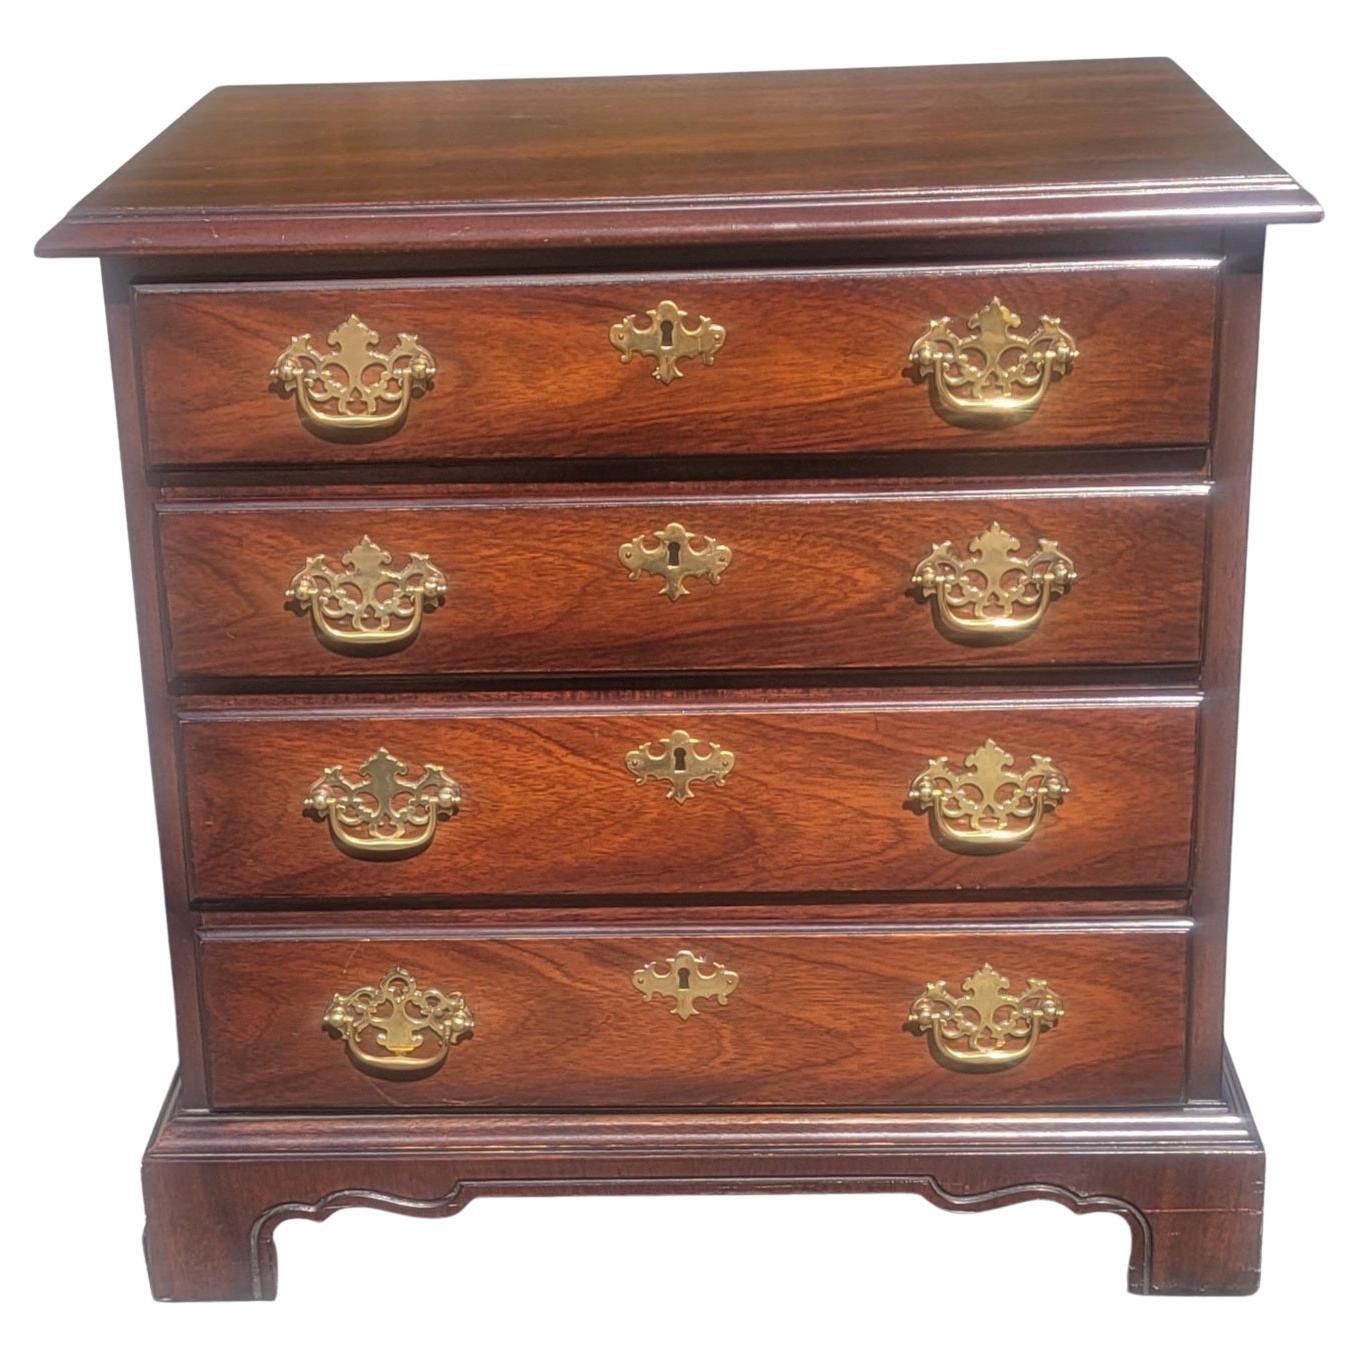 A beautiful bed side chest of drawers / nightstand from the prestigious Drexel's Bi Centennial Collection. 
Very good vintage condition with few signs of use. Measures 23.5